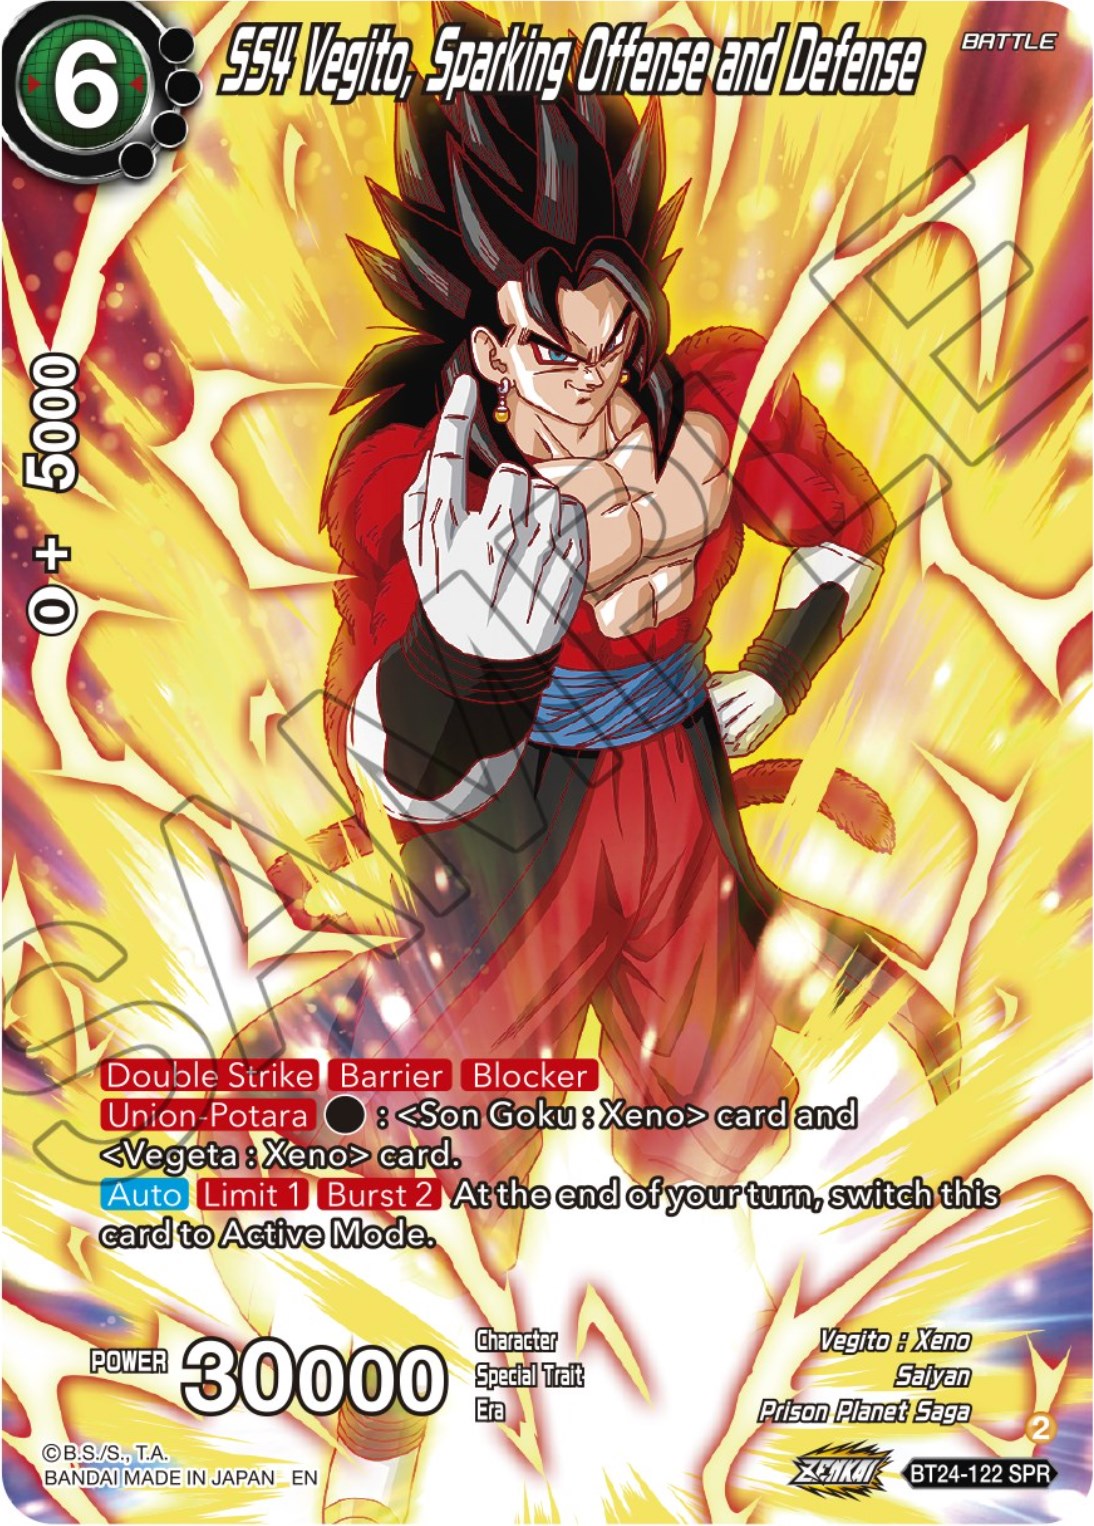 SS4 Vegito, Sparking Offense and Defense (SPR) (BT24-122) [Beyond Generations] | Amazing Games TCG